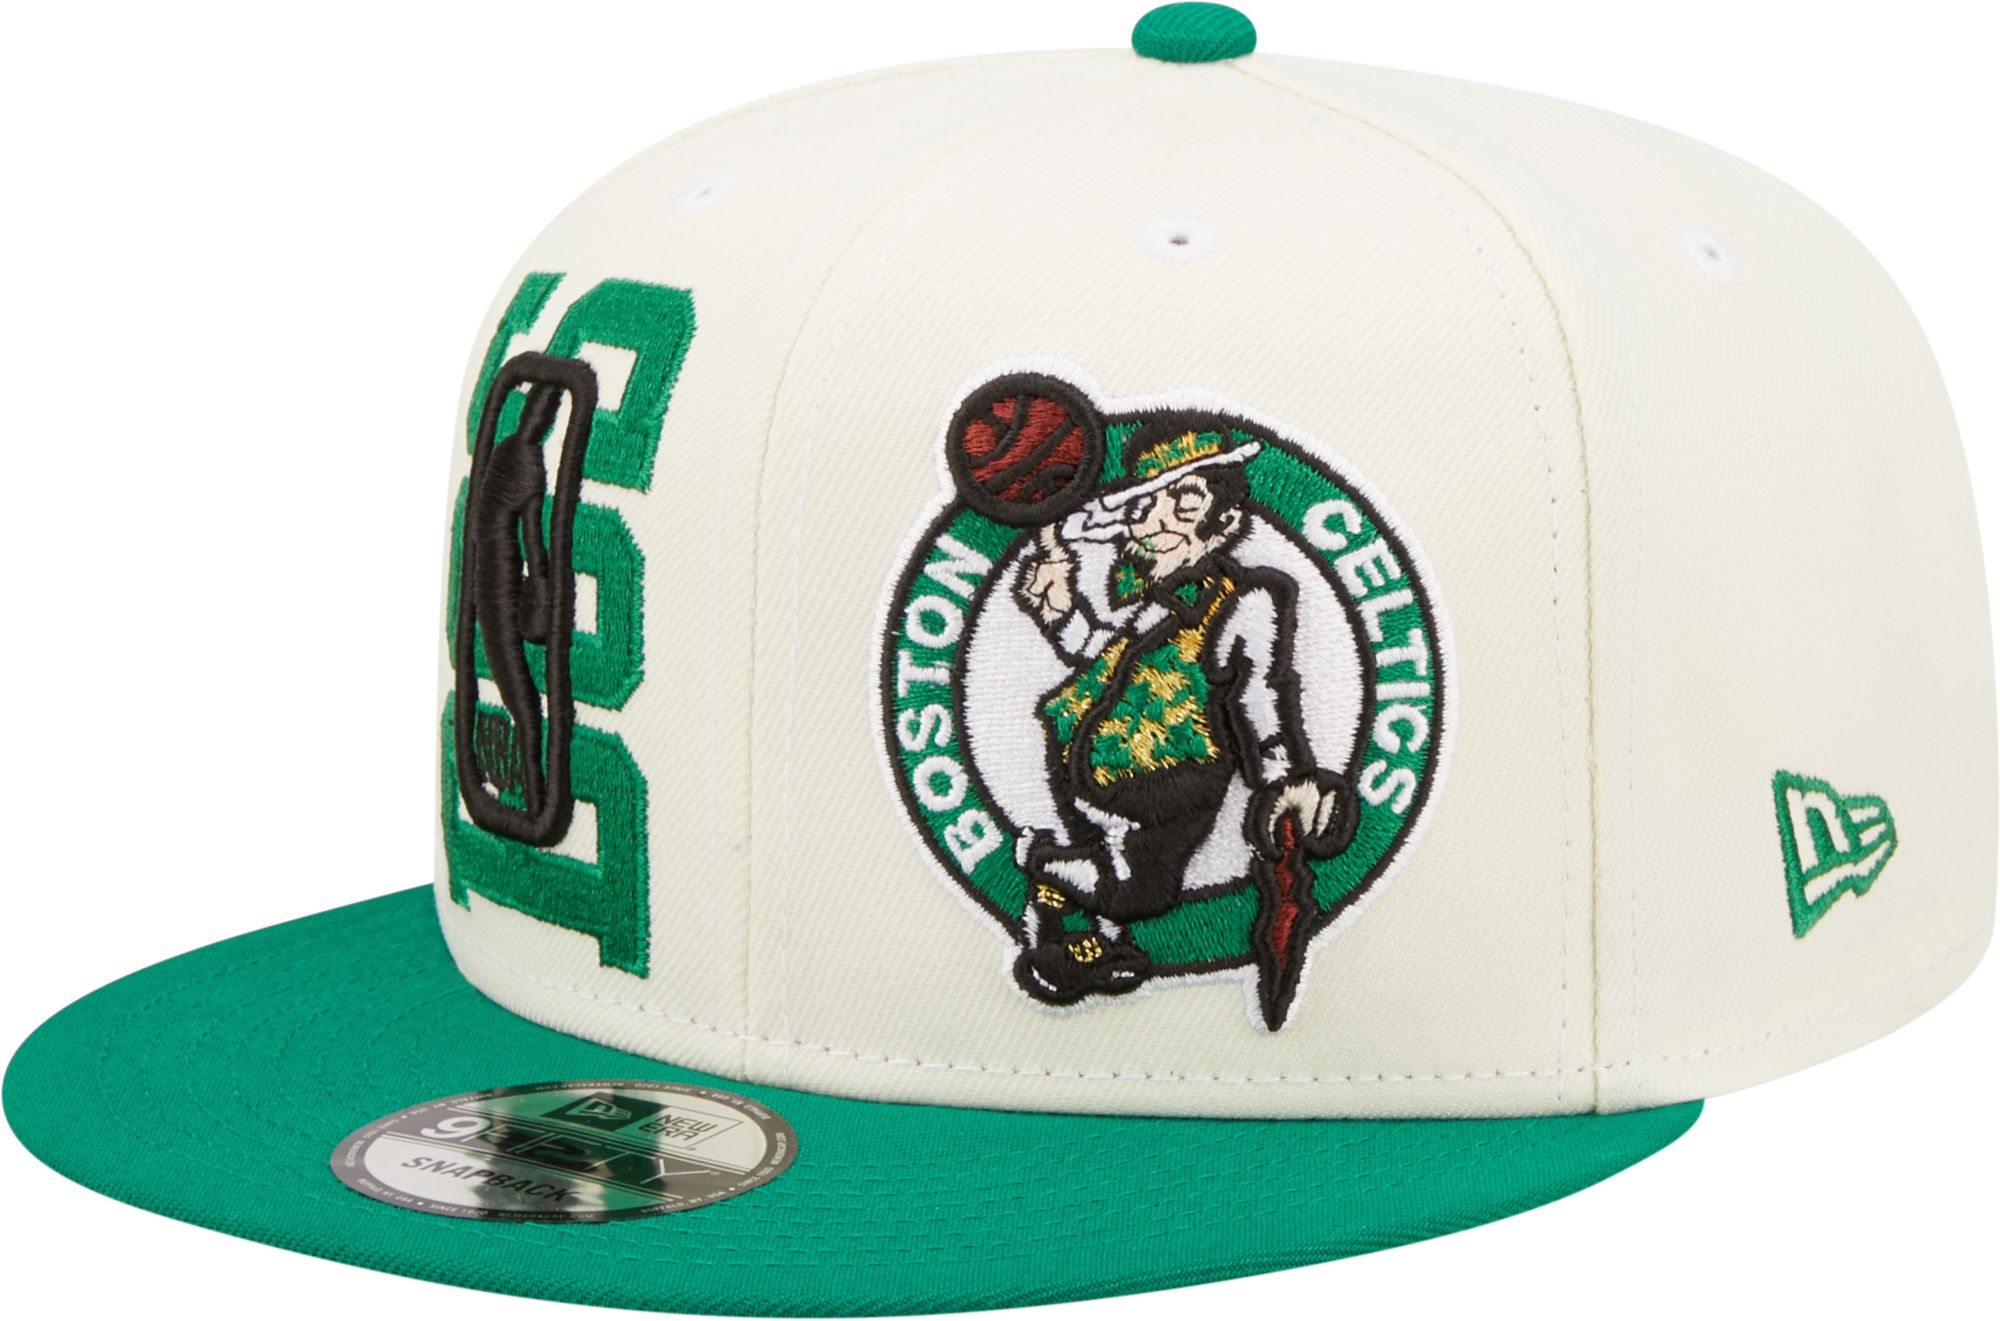 New Era / Men's 2021-22 City Edition Boston Celtics Green 59Fifty Fitted Hat